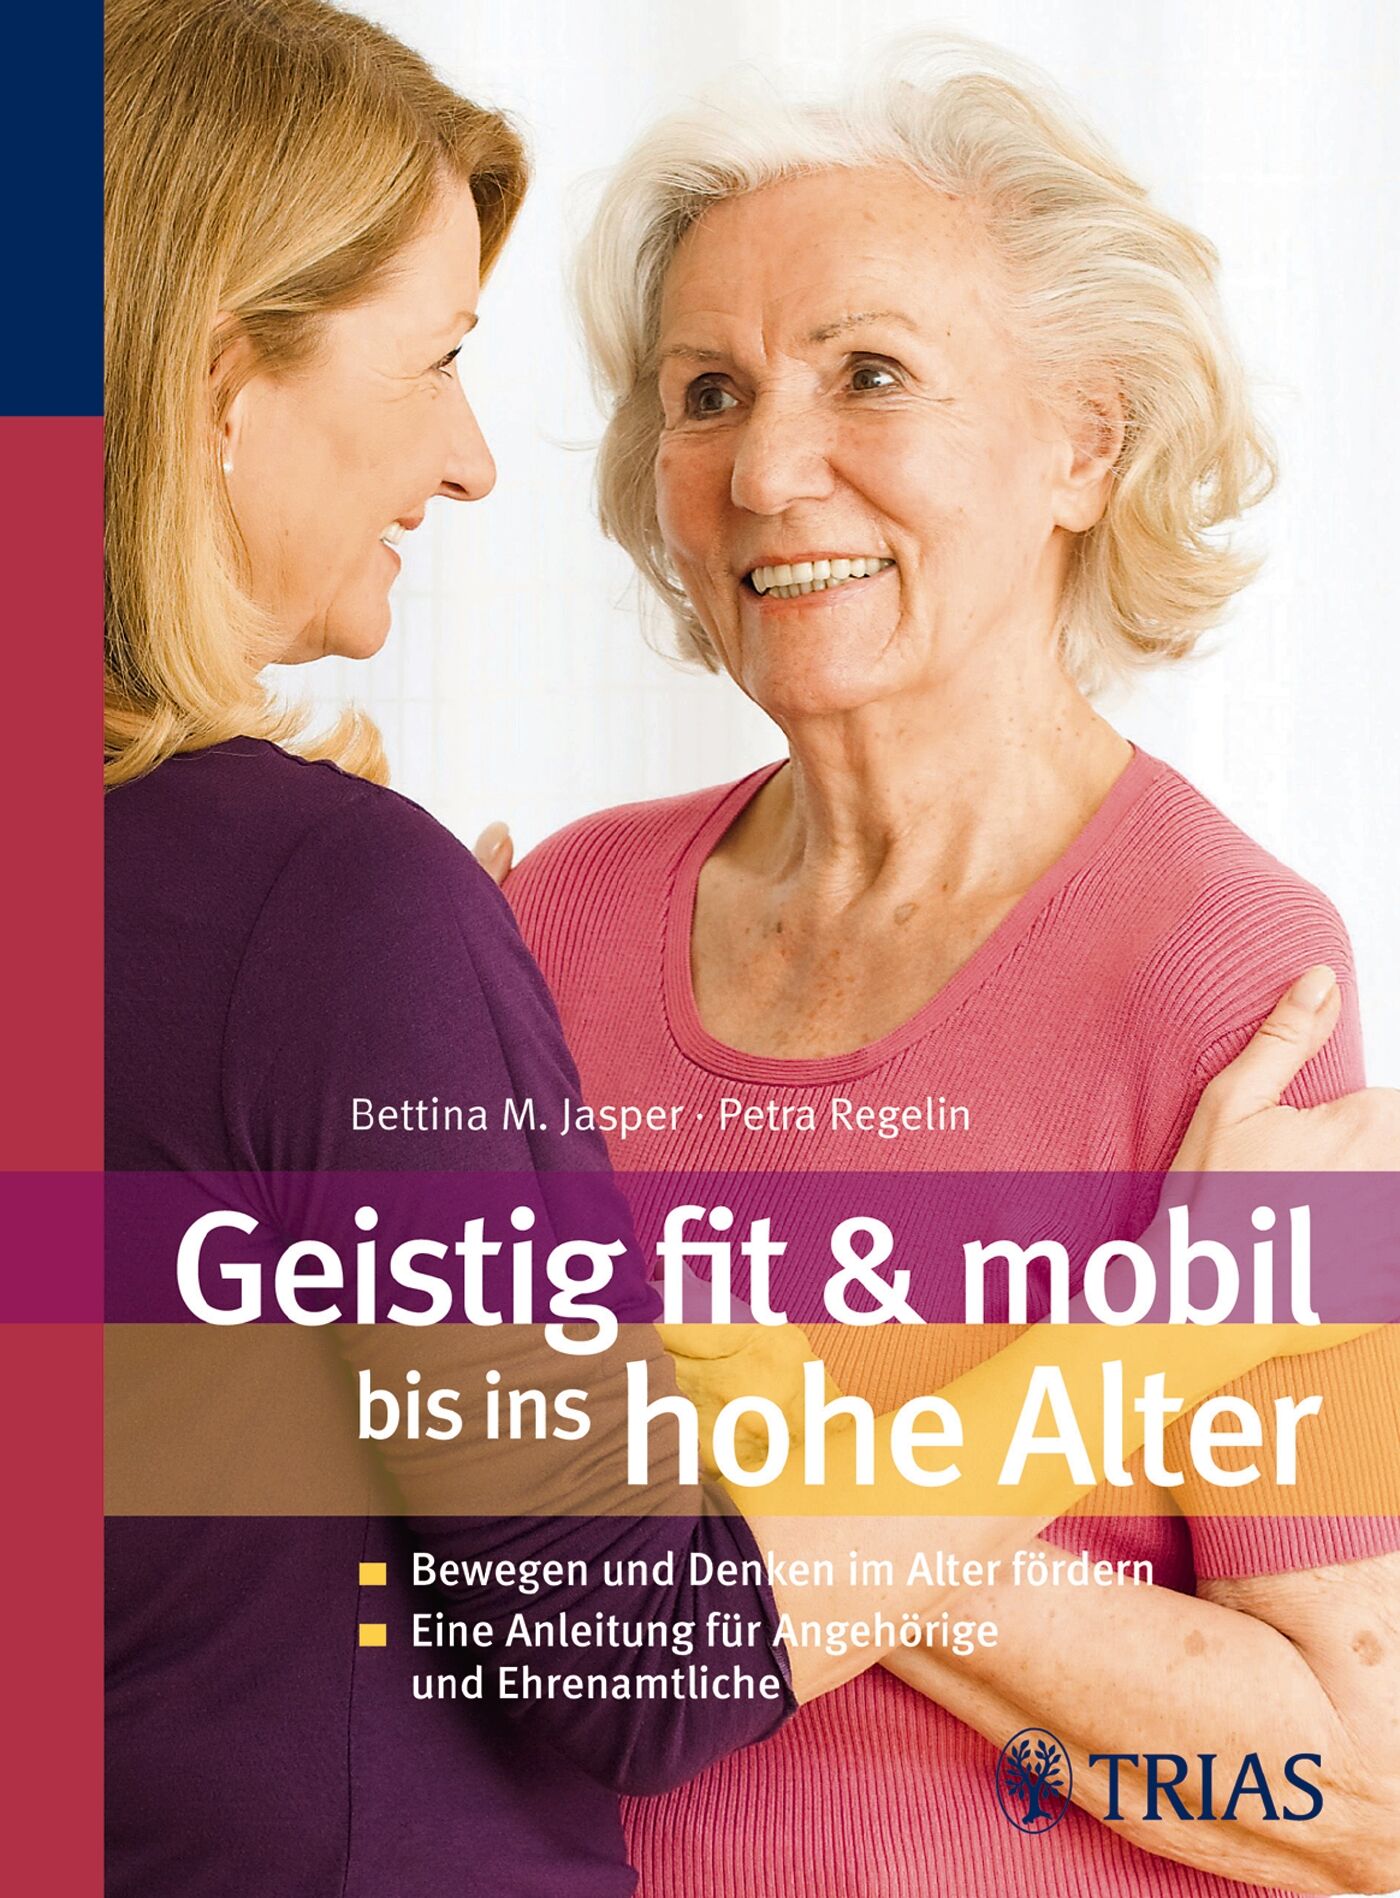 Geistig fit & mobil bis ins hohe Alter, 9783830437840